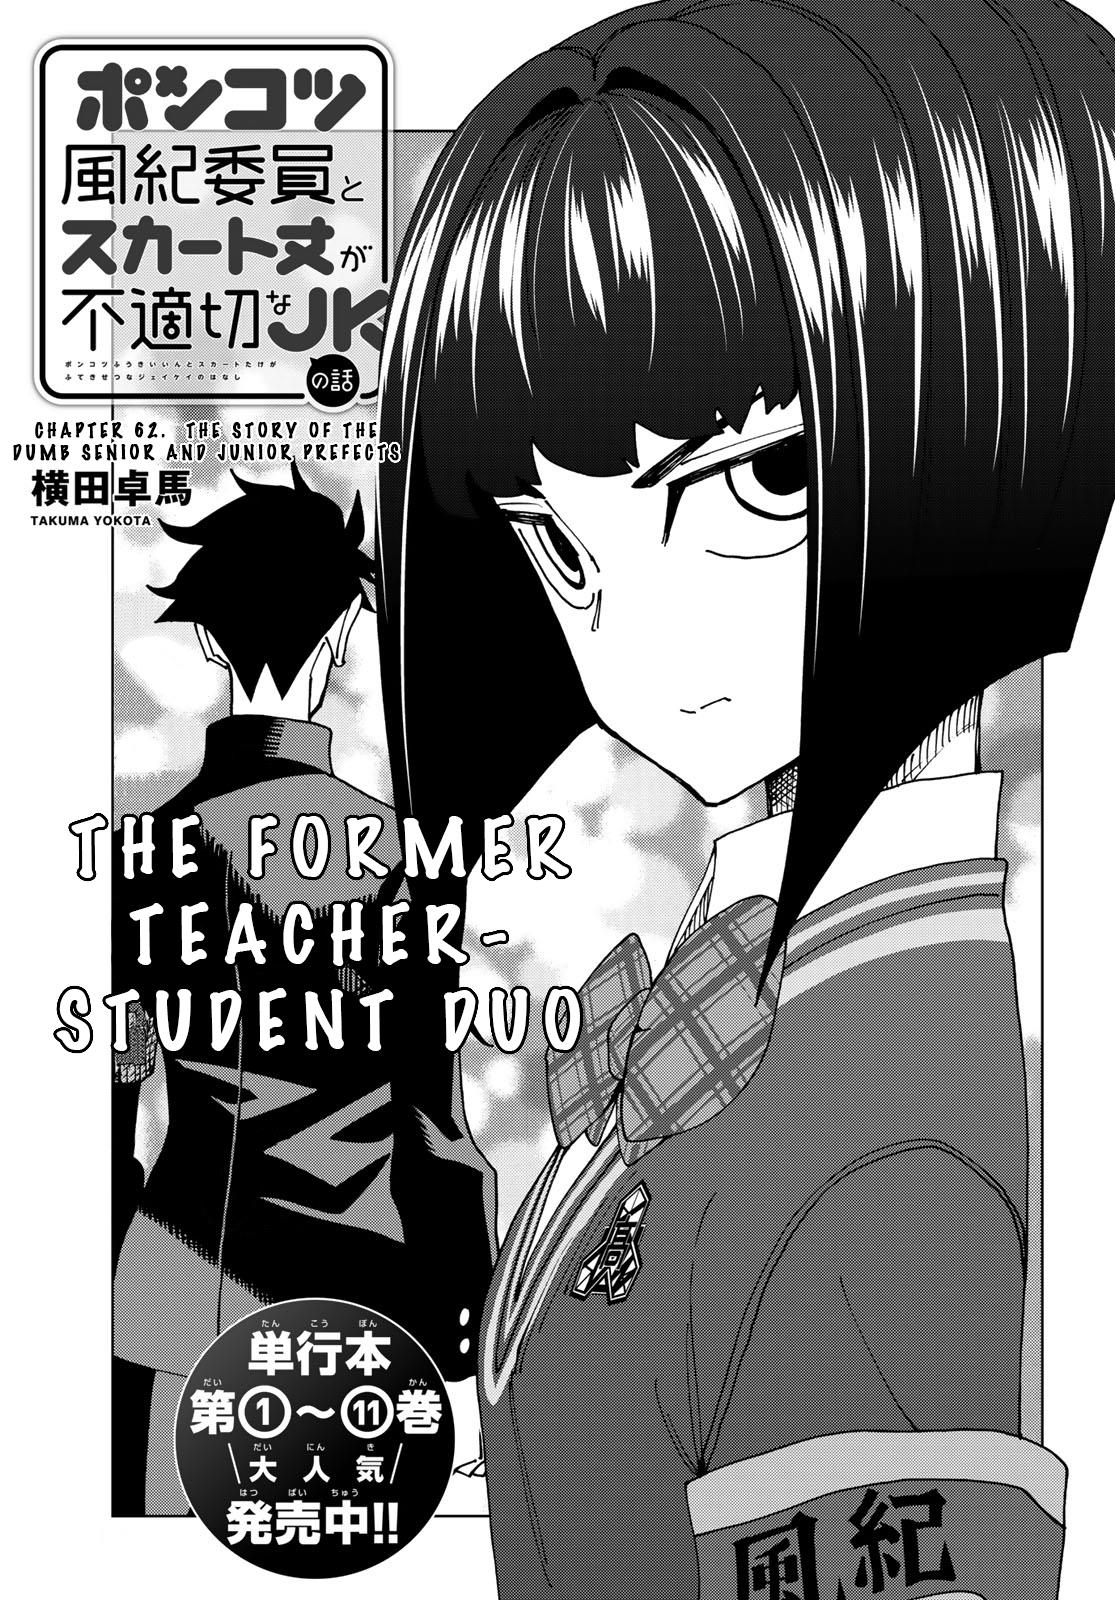 The Story Between A Dumb Prefect And A High School Girl With An Inappropriate Skirt Length Chapter 62: The Story Of The Dumb Senior And Junior Prefects - Picture 2